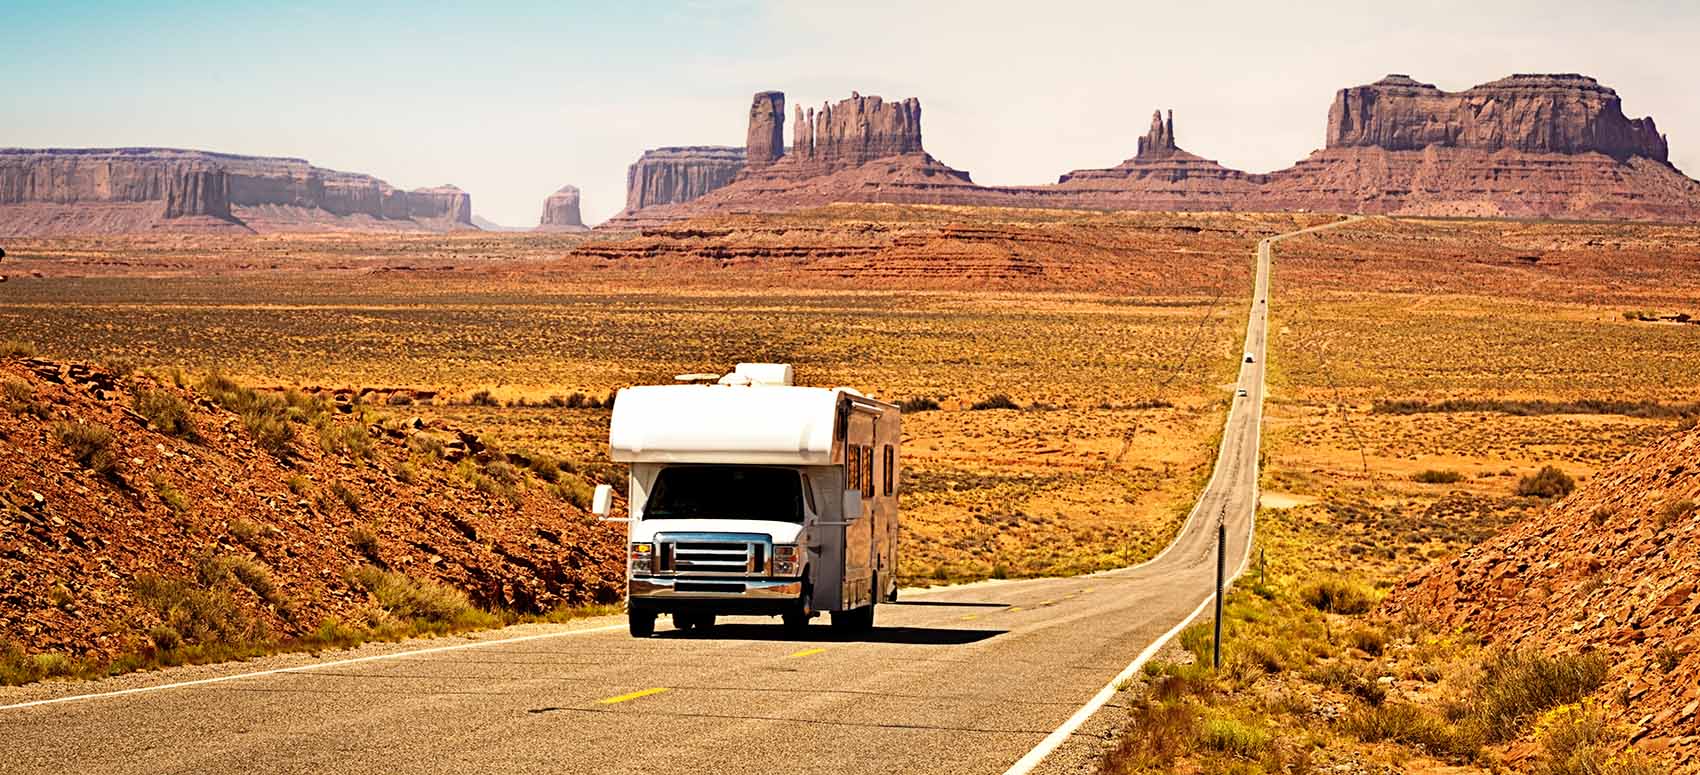 camper road trip at monument valley tribal park